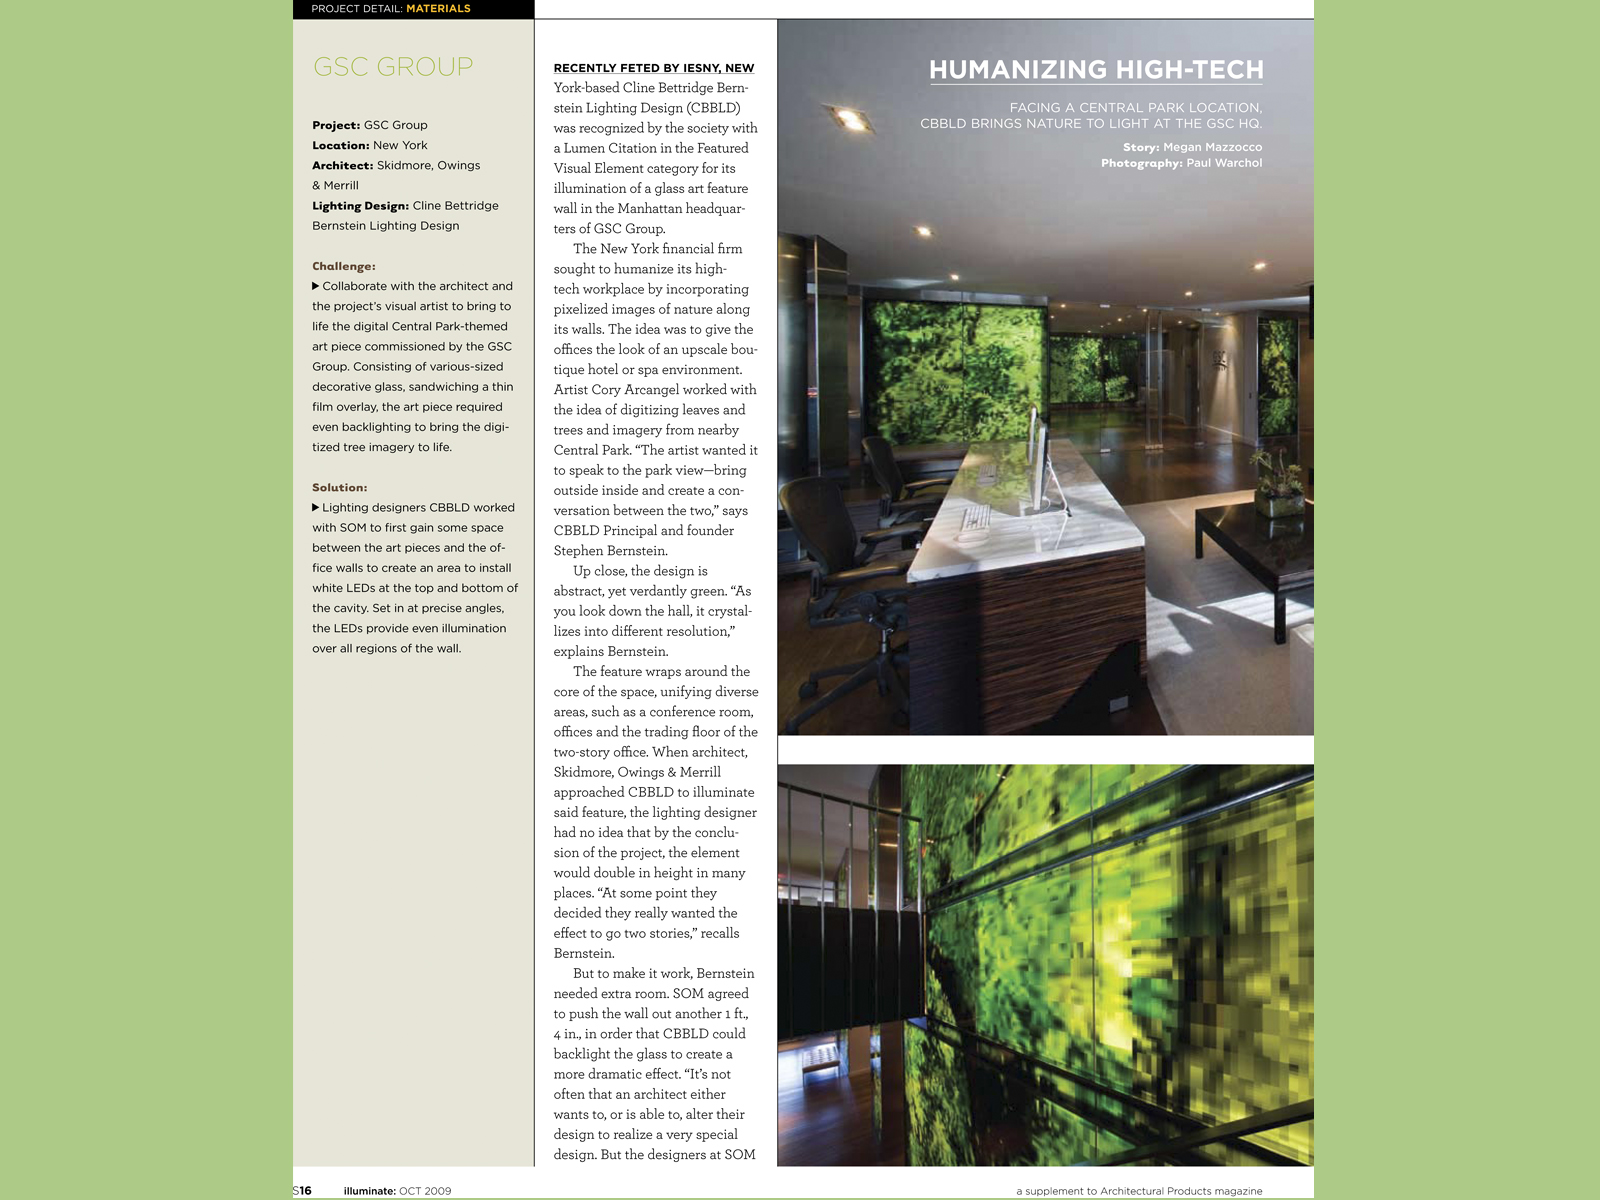 GSC Group Offices’ Lighting Design Featured in Illuminate Magazine